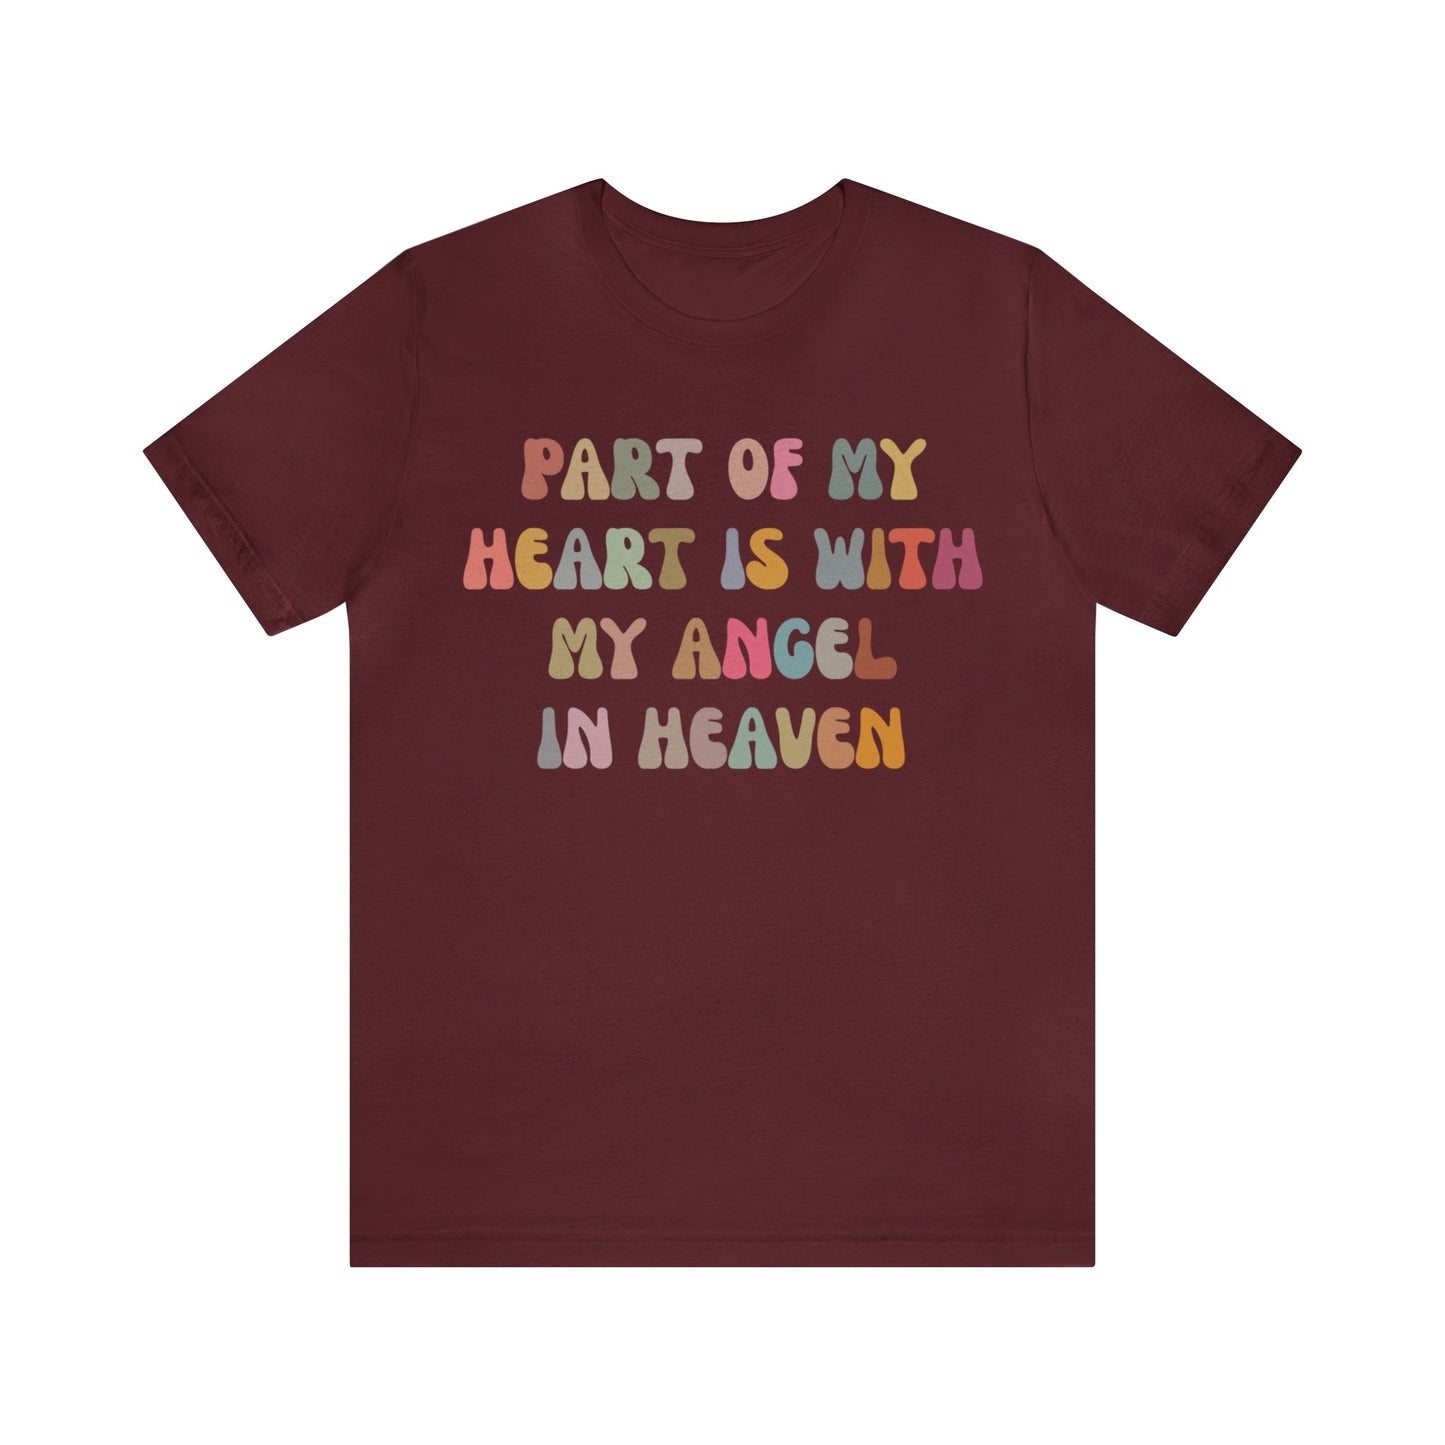 Part Of My Heart Is With My Angel In Heaven Shirt,Inspirational Shirt, Mom Shirt, Happy Life, Positive Shirt, Motivational Shirt, T1297